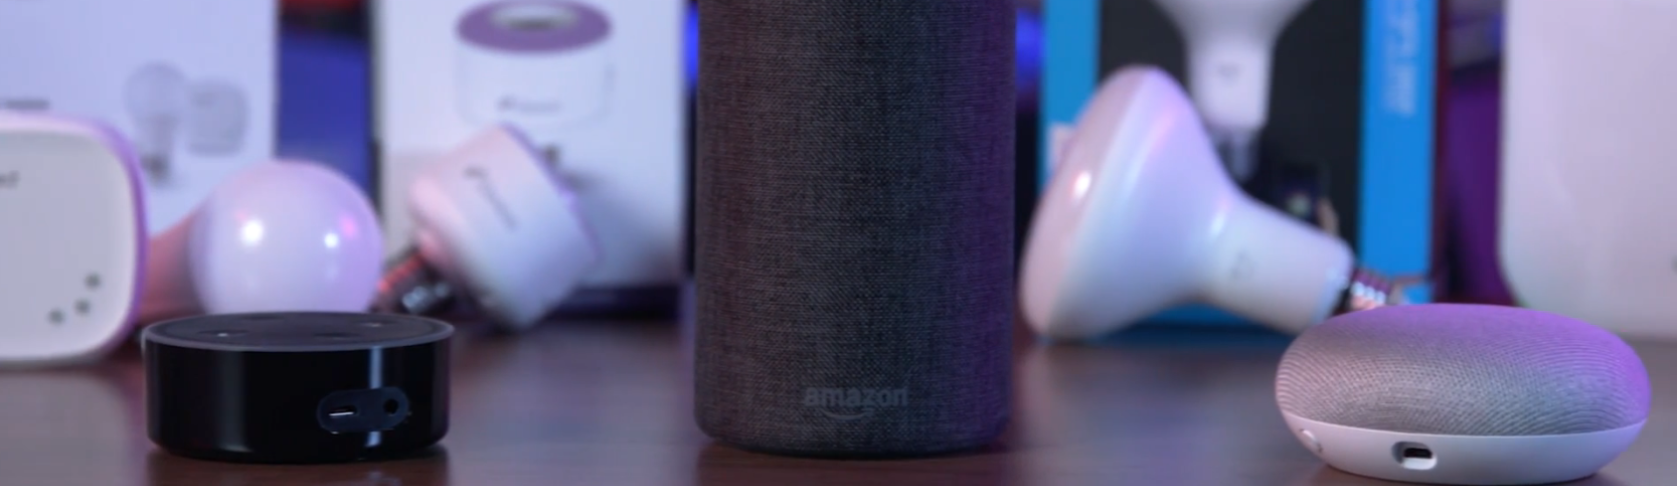 WATCH: The Best Things to Do with Amazon Alexa and Google Assistant